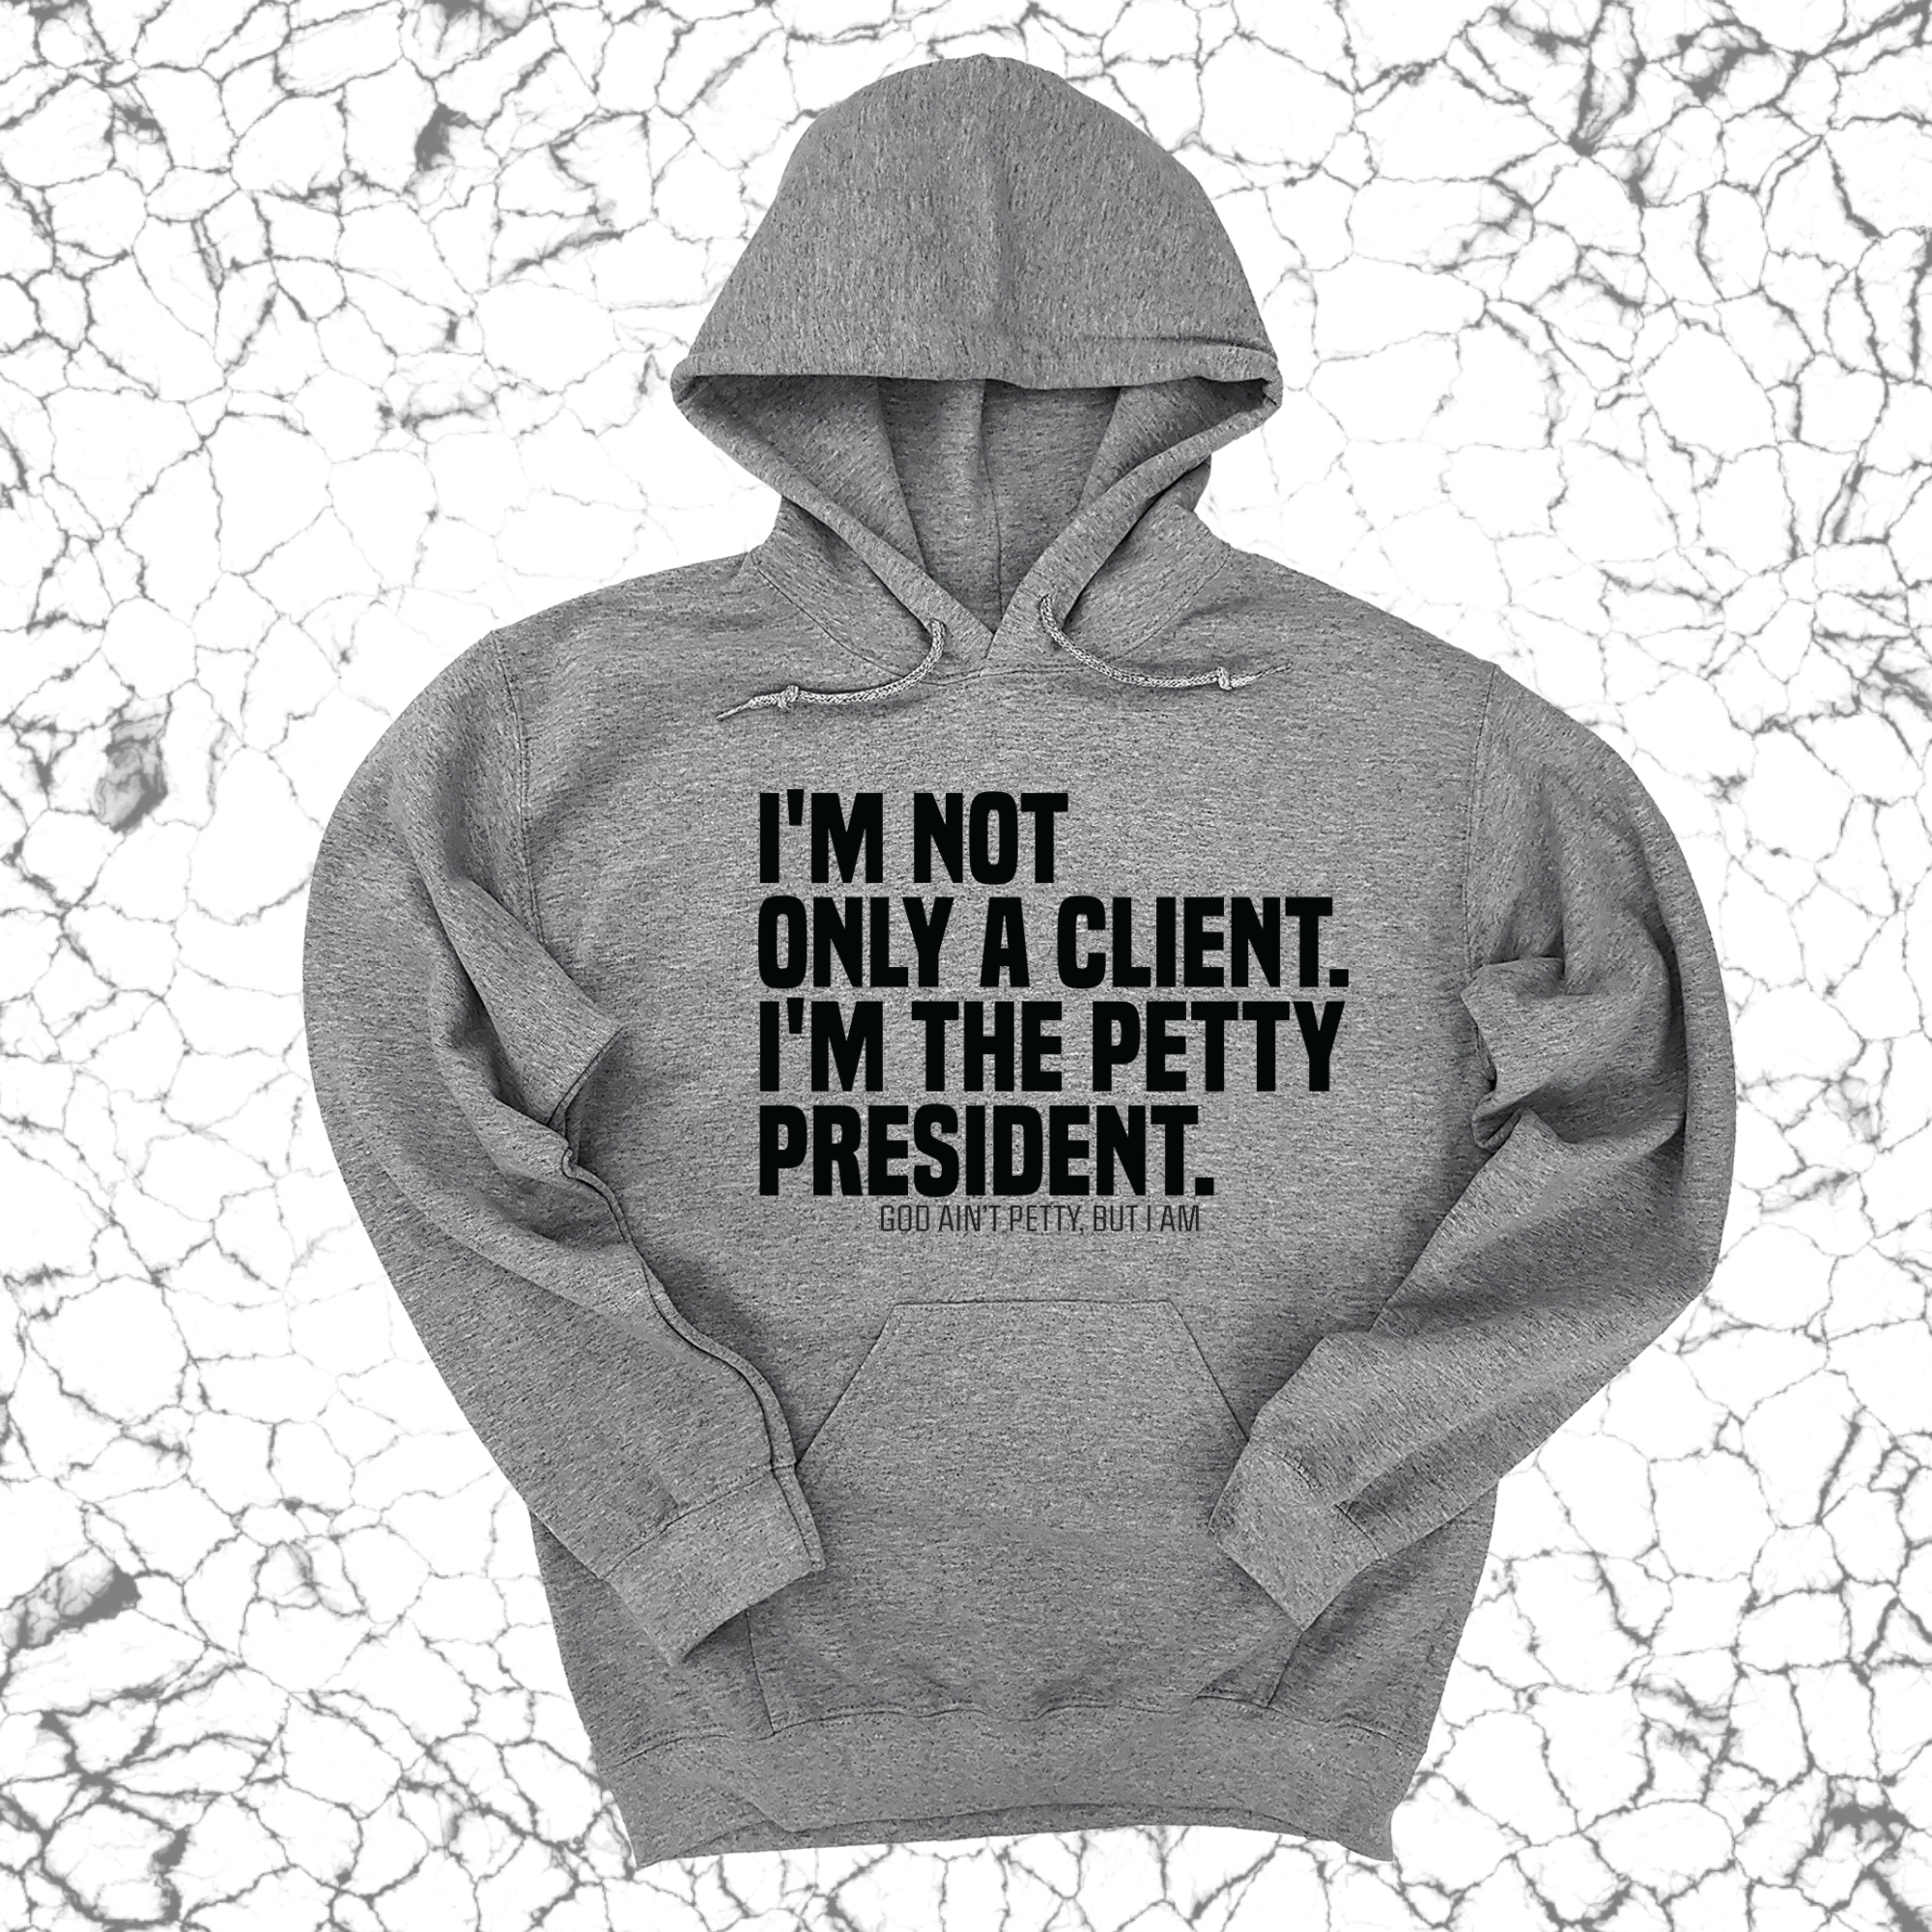 IMPERFECT -I'M NOT ONLY A CLIENT. I'M THE PETTY PRESIDENT HOODIE GREY/BLACK 5XL-The Original God Ain't Petty But I Am